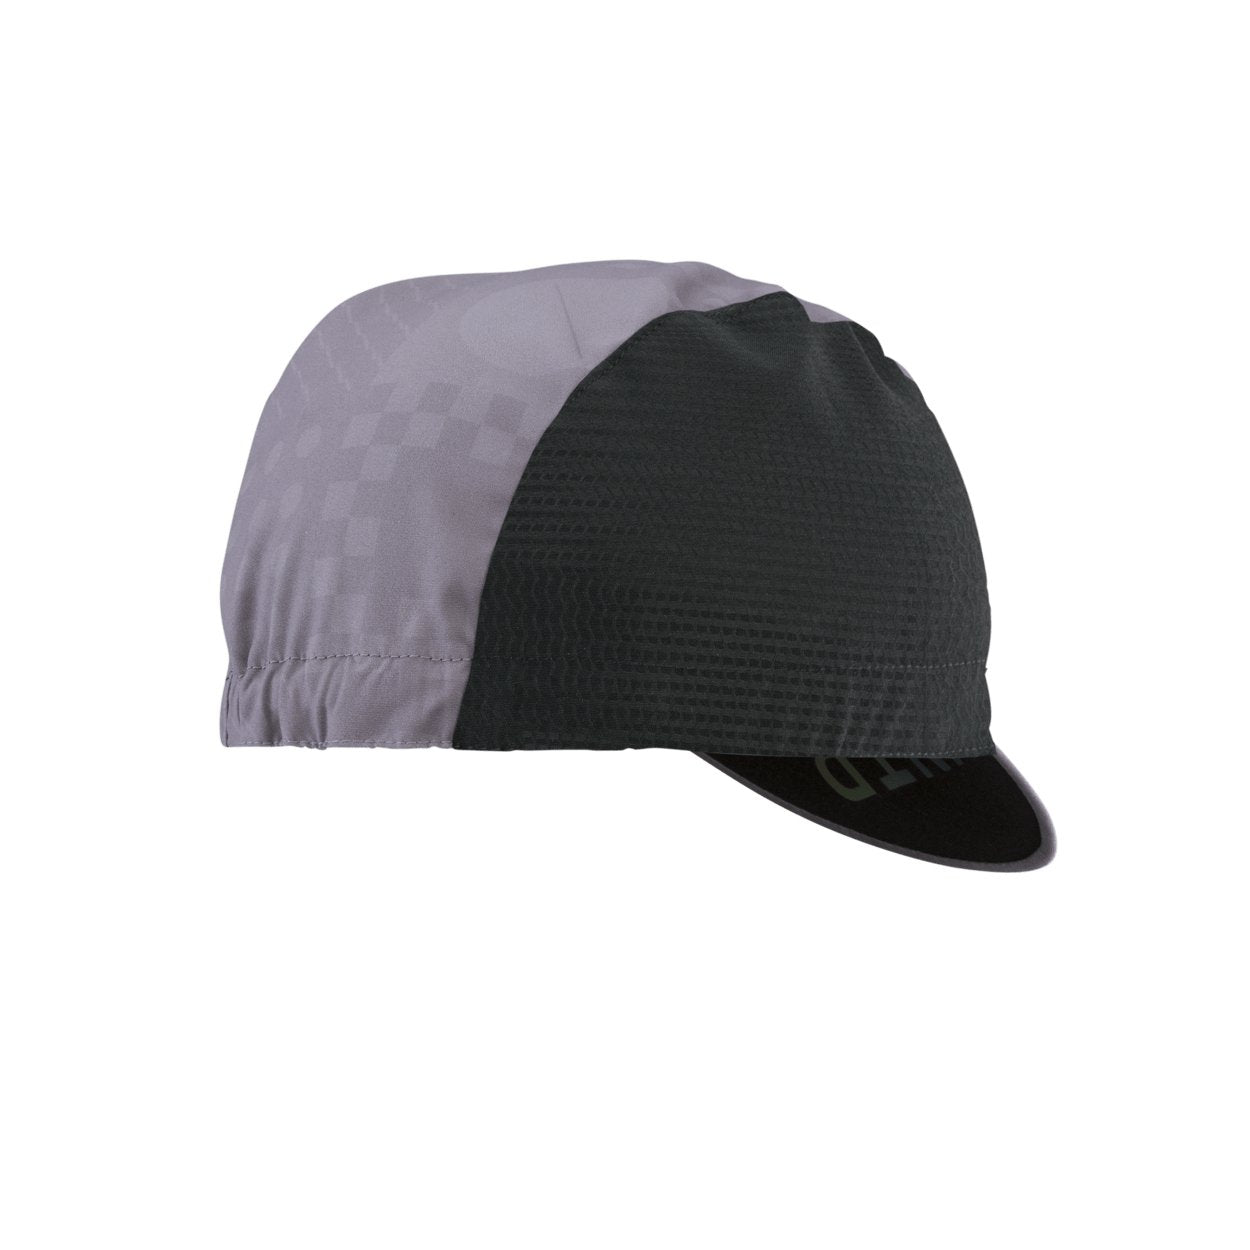 ION Cap VNTR 2024 - Worthing Watersports - 9010583105833 - Apparel - ION Bike